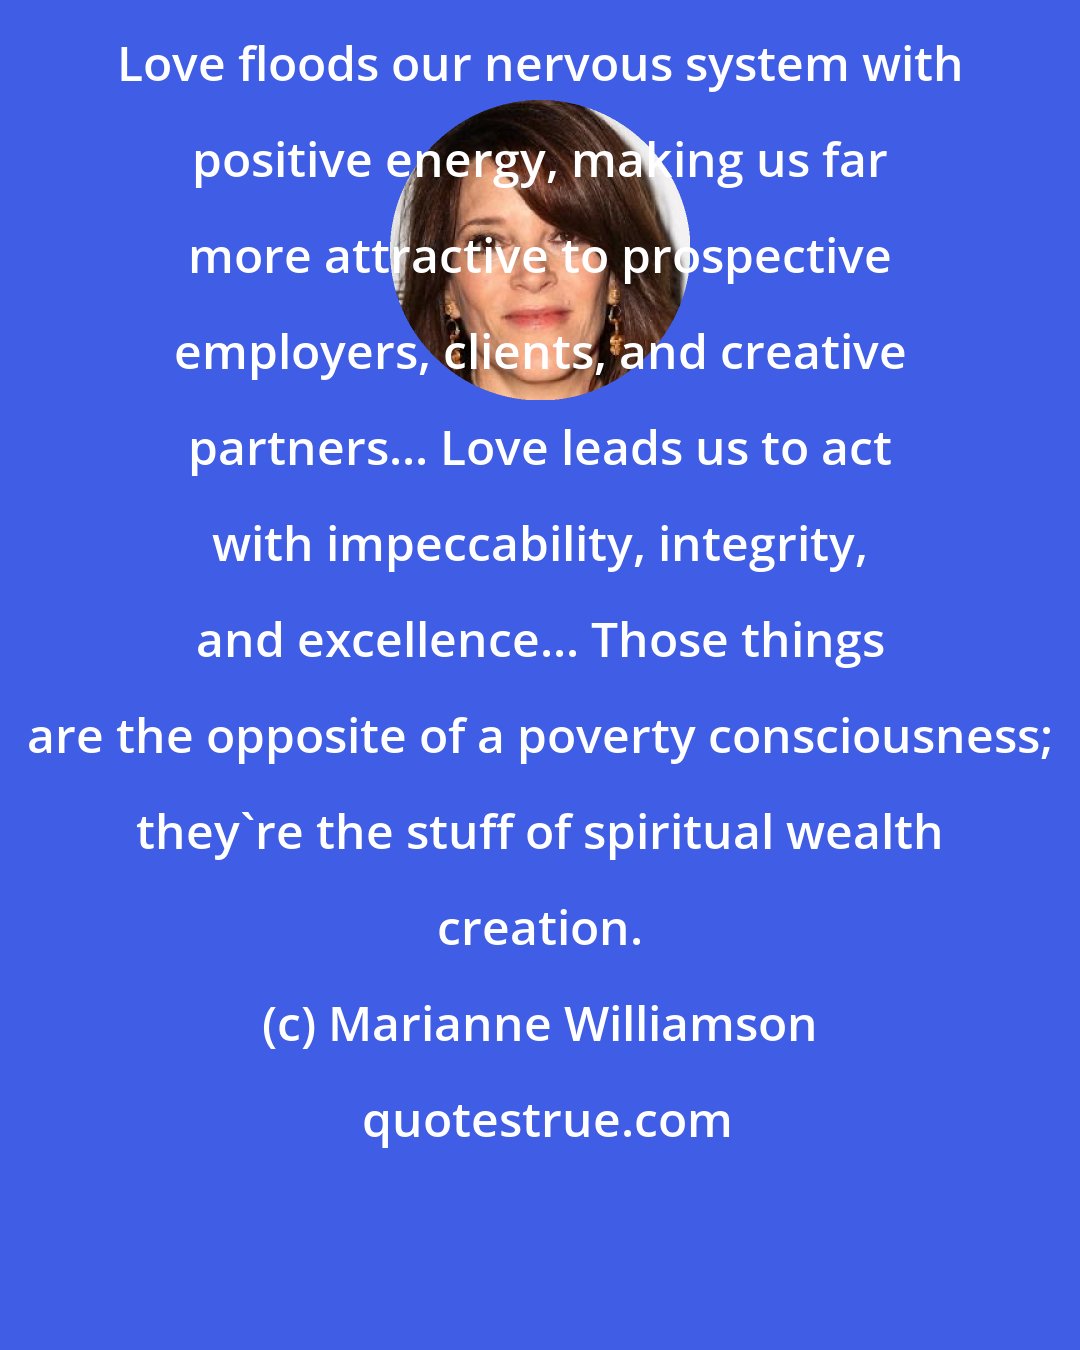 Marianne Williamson: Love floods our nervous system with positive energy, making us far more attractive to prospective employers, clients, and creative partners... Love leads us to act with impeccability, integrity, and excellence... Those things are the opposite of a poverty consciousness; they're the stuff of spiritual wealth creation.